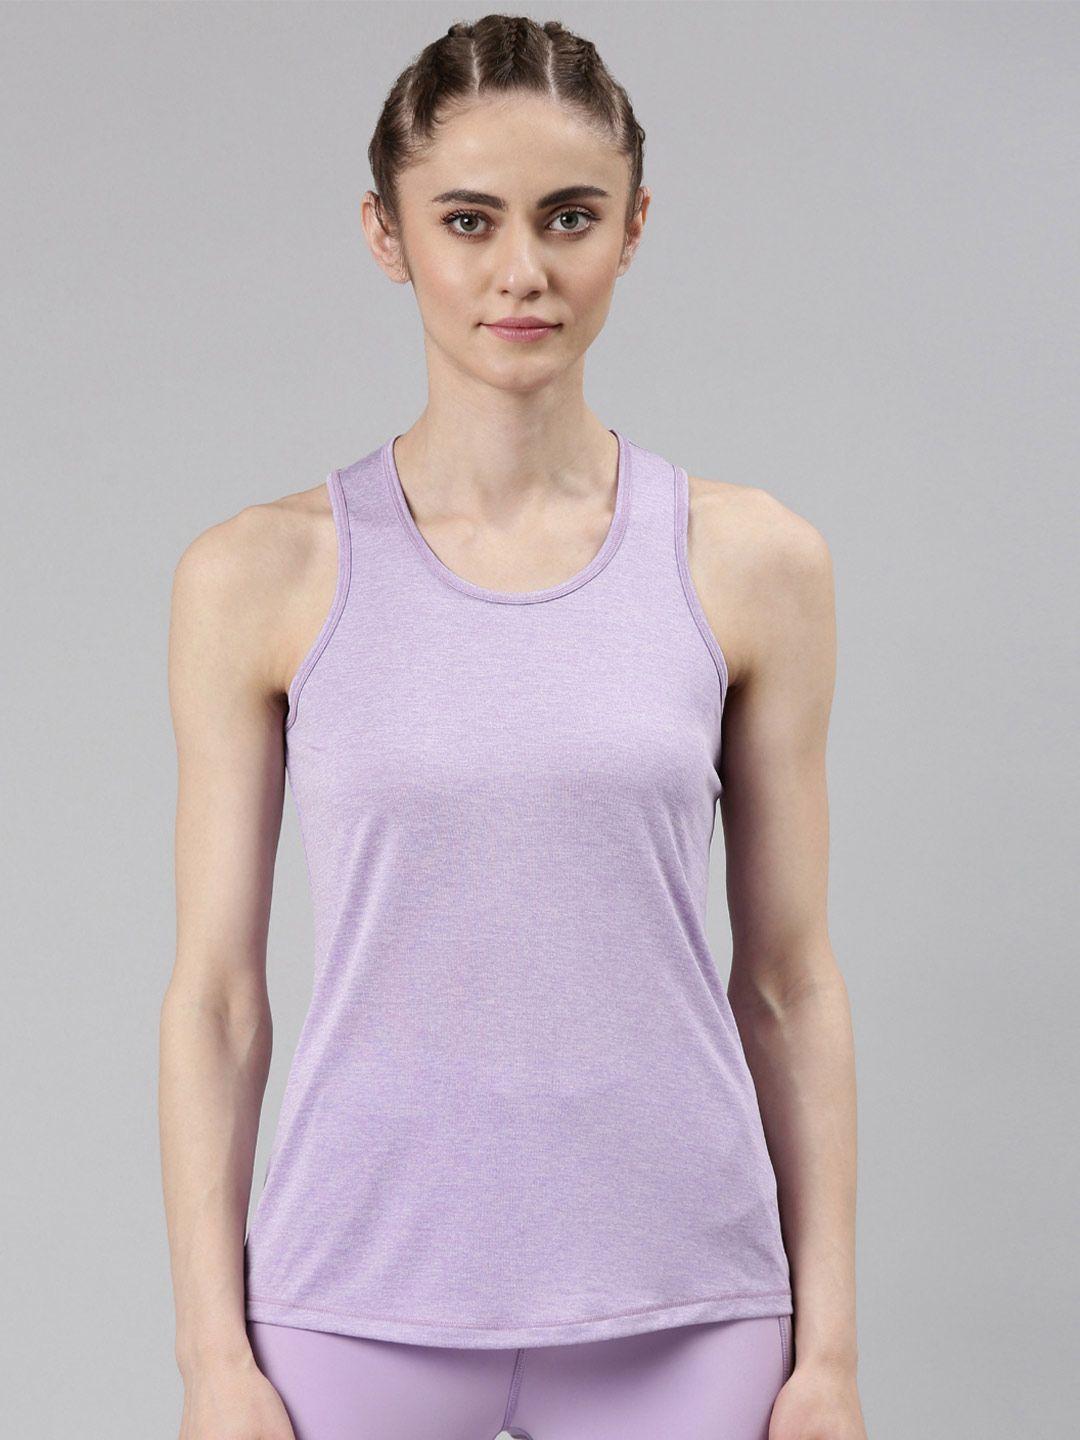 enamor knitted dry fit antimicrobial tank top